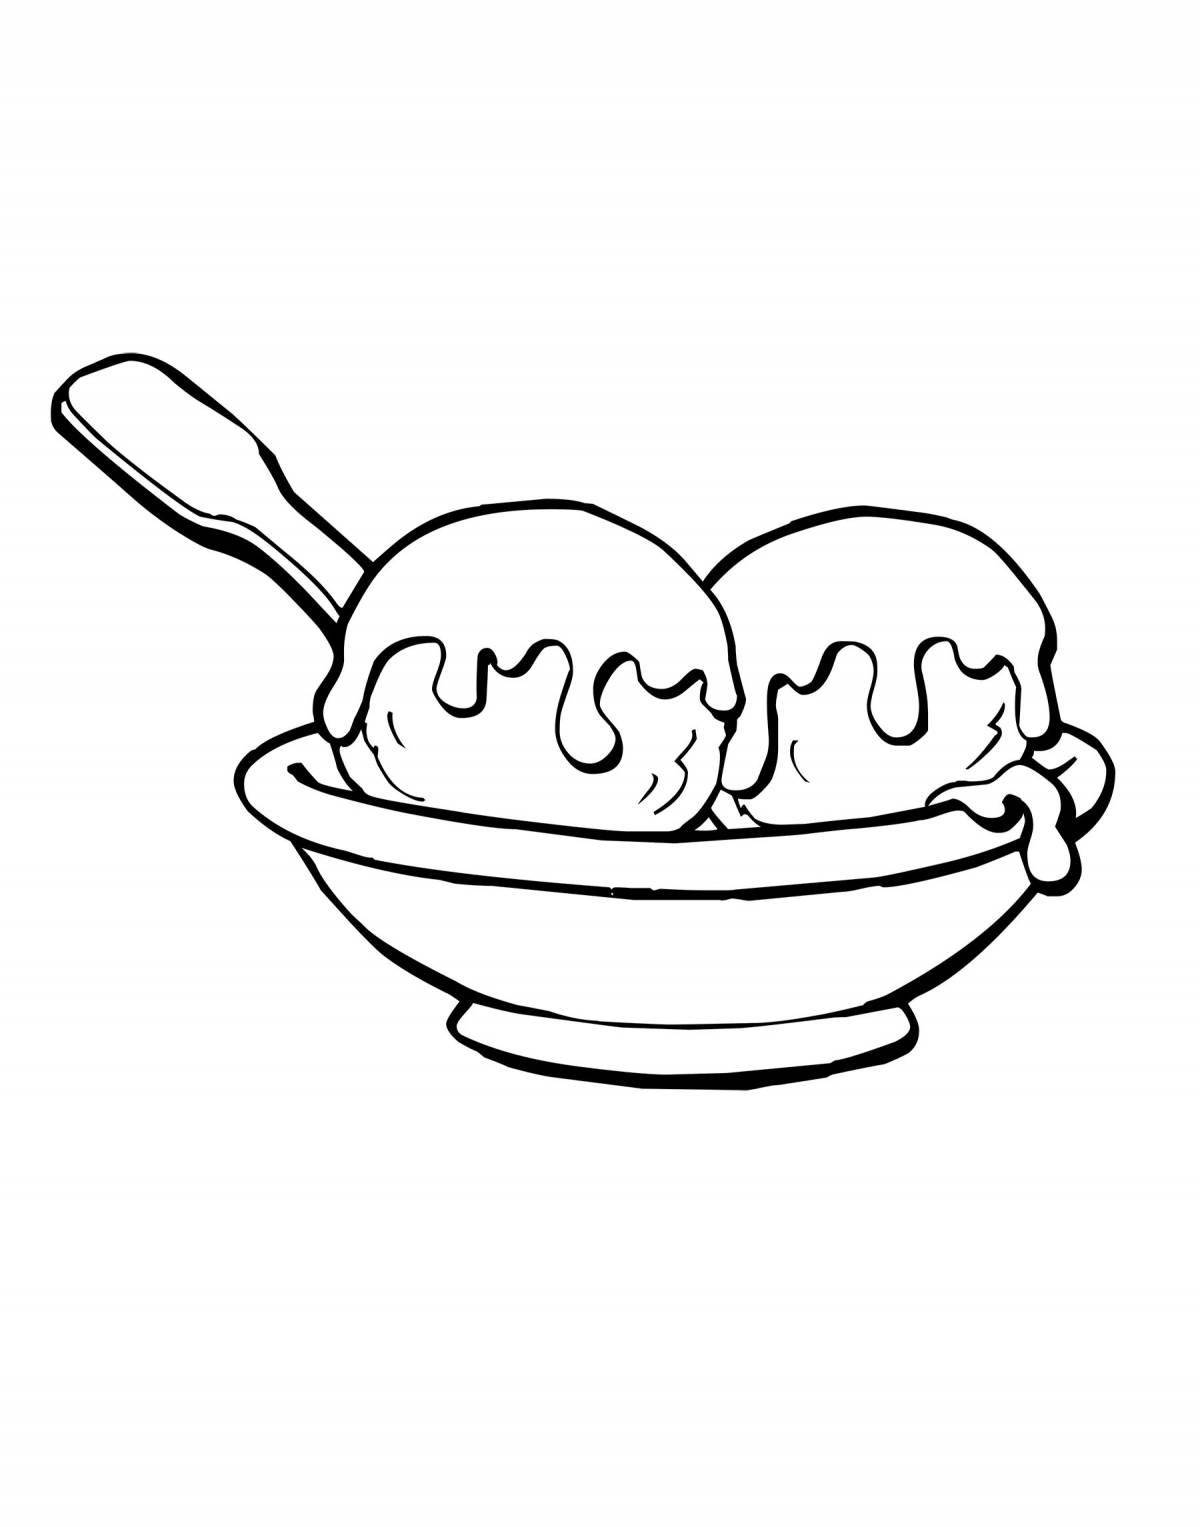 Exquisite ooty food coloring page